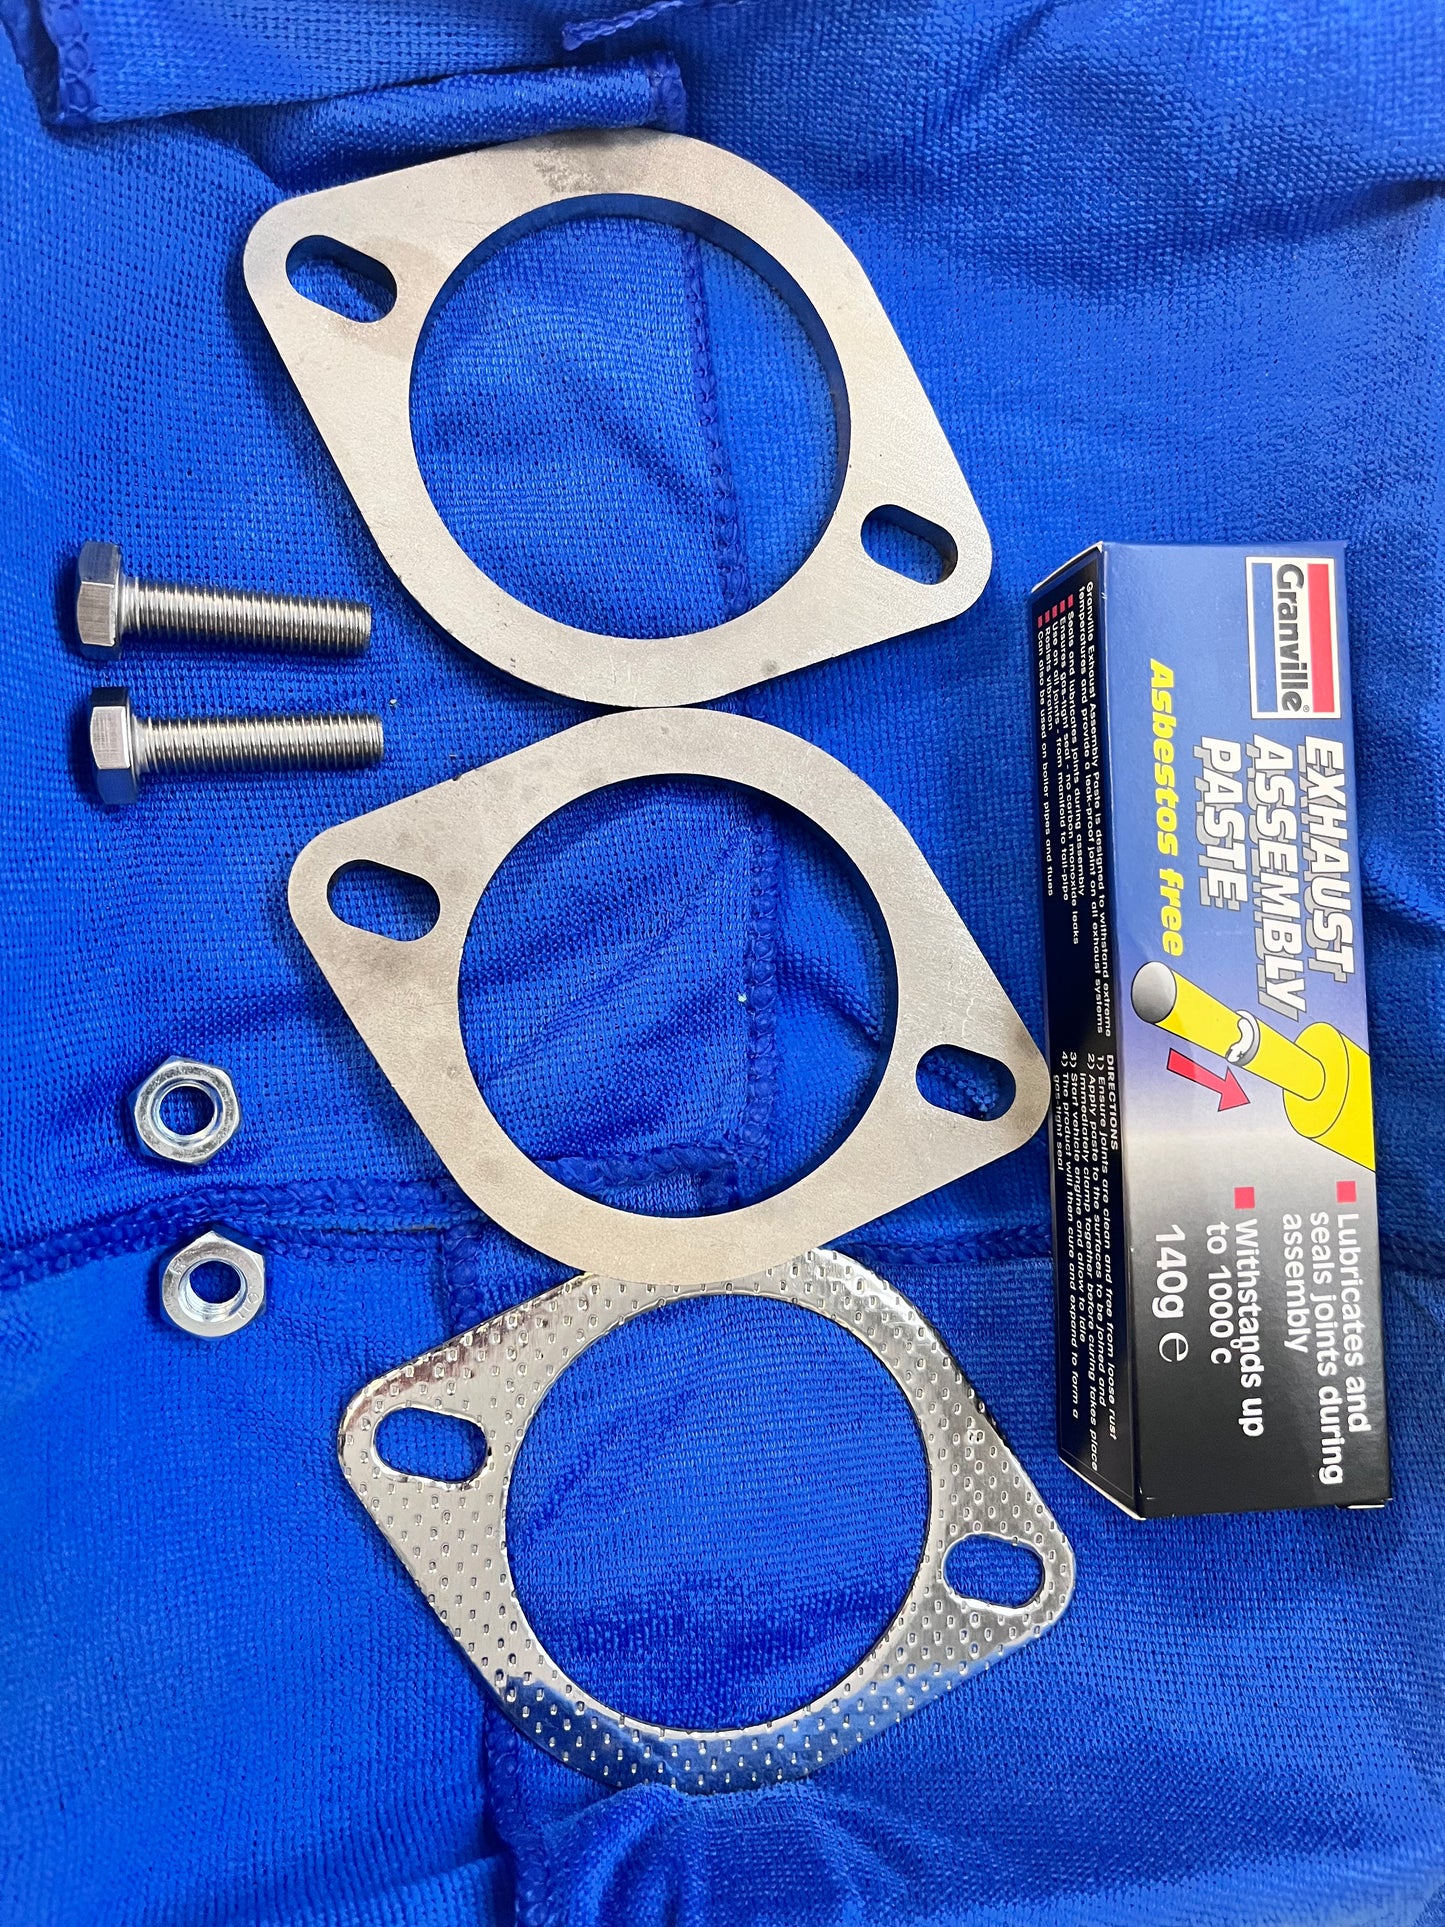 Stainless Steel 2.5" Exhaust Flange and Gasket Kit with Exhaust Sealant Paste - Pipe Dynamics